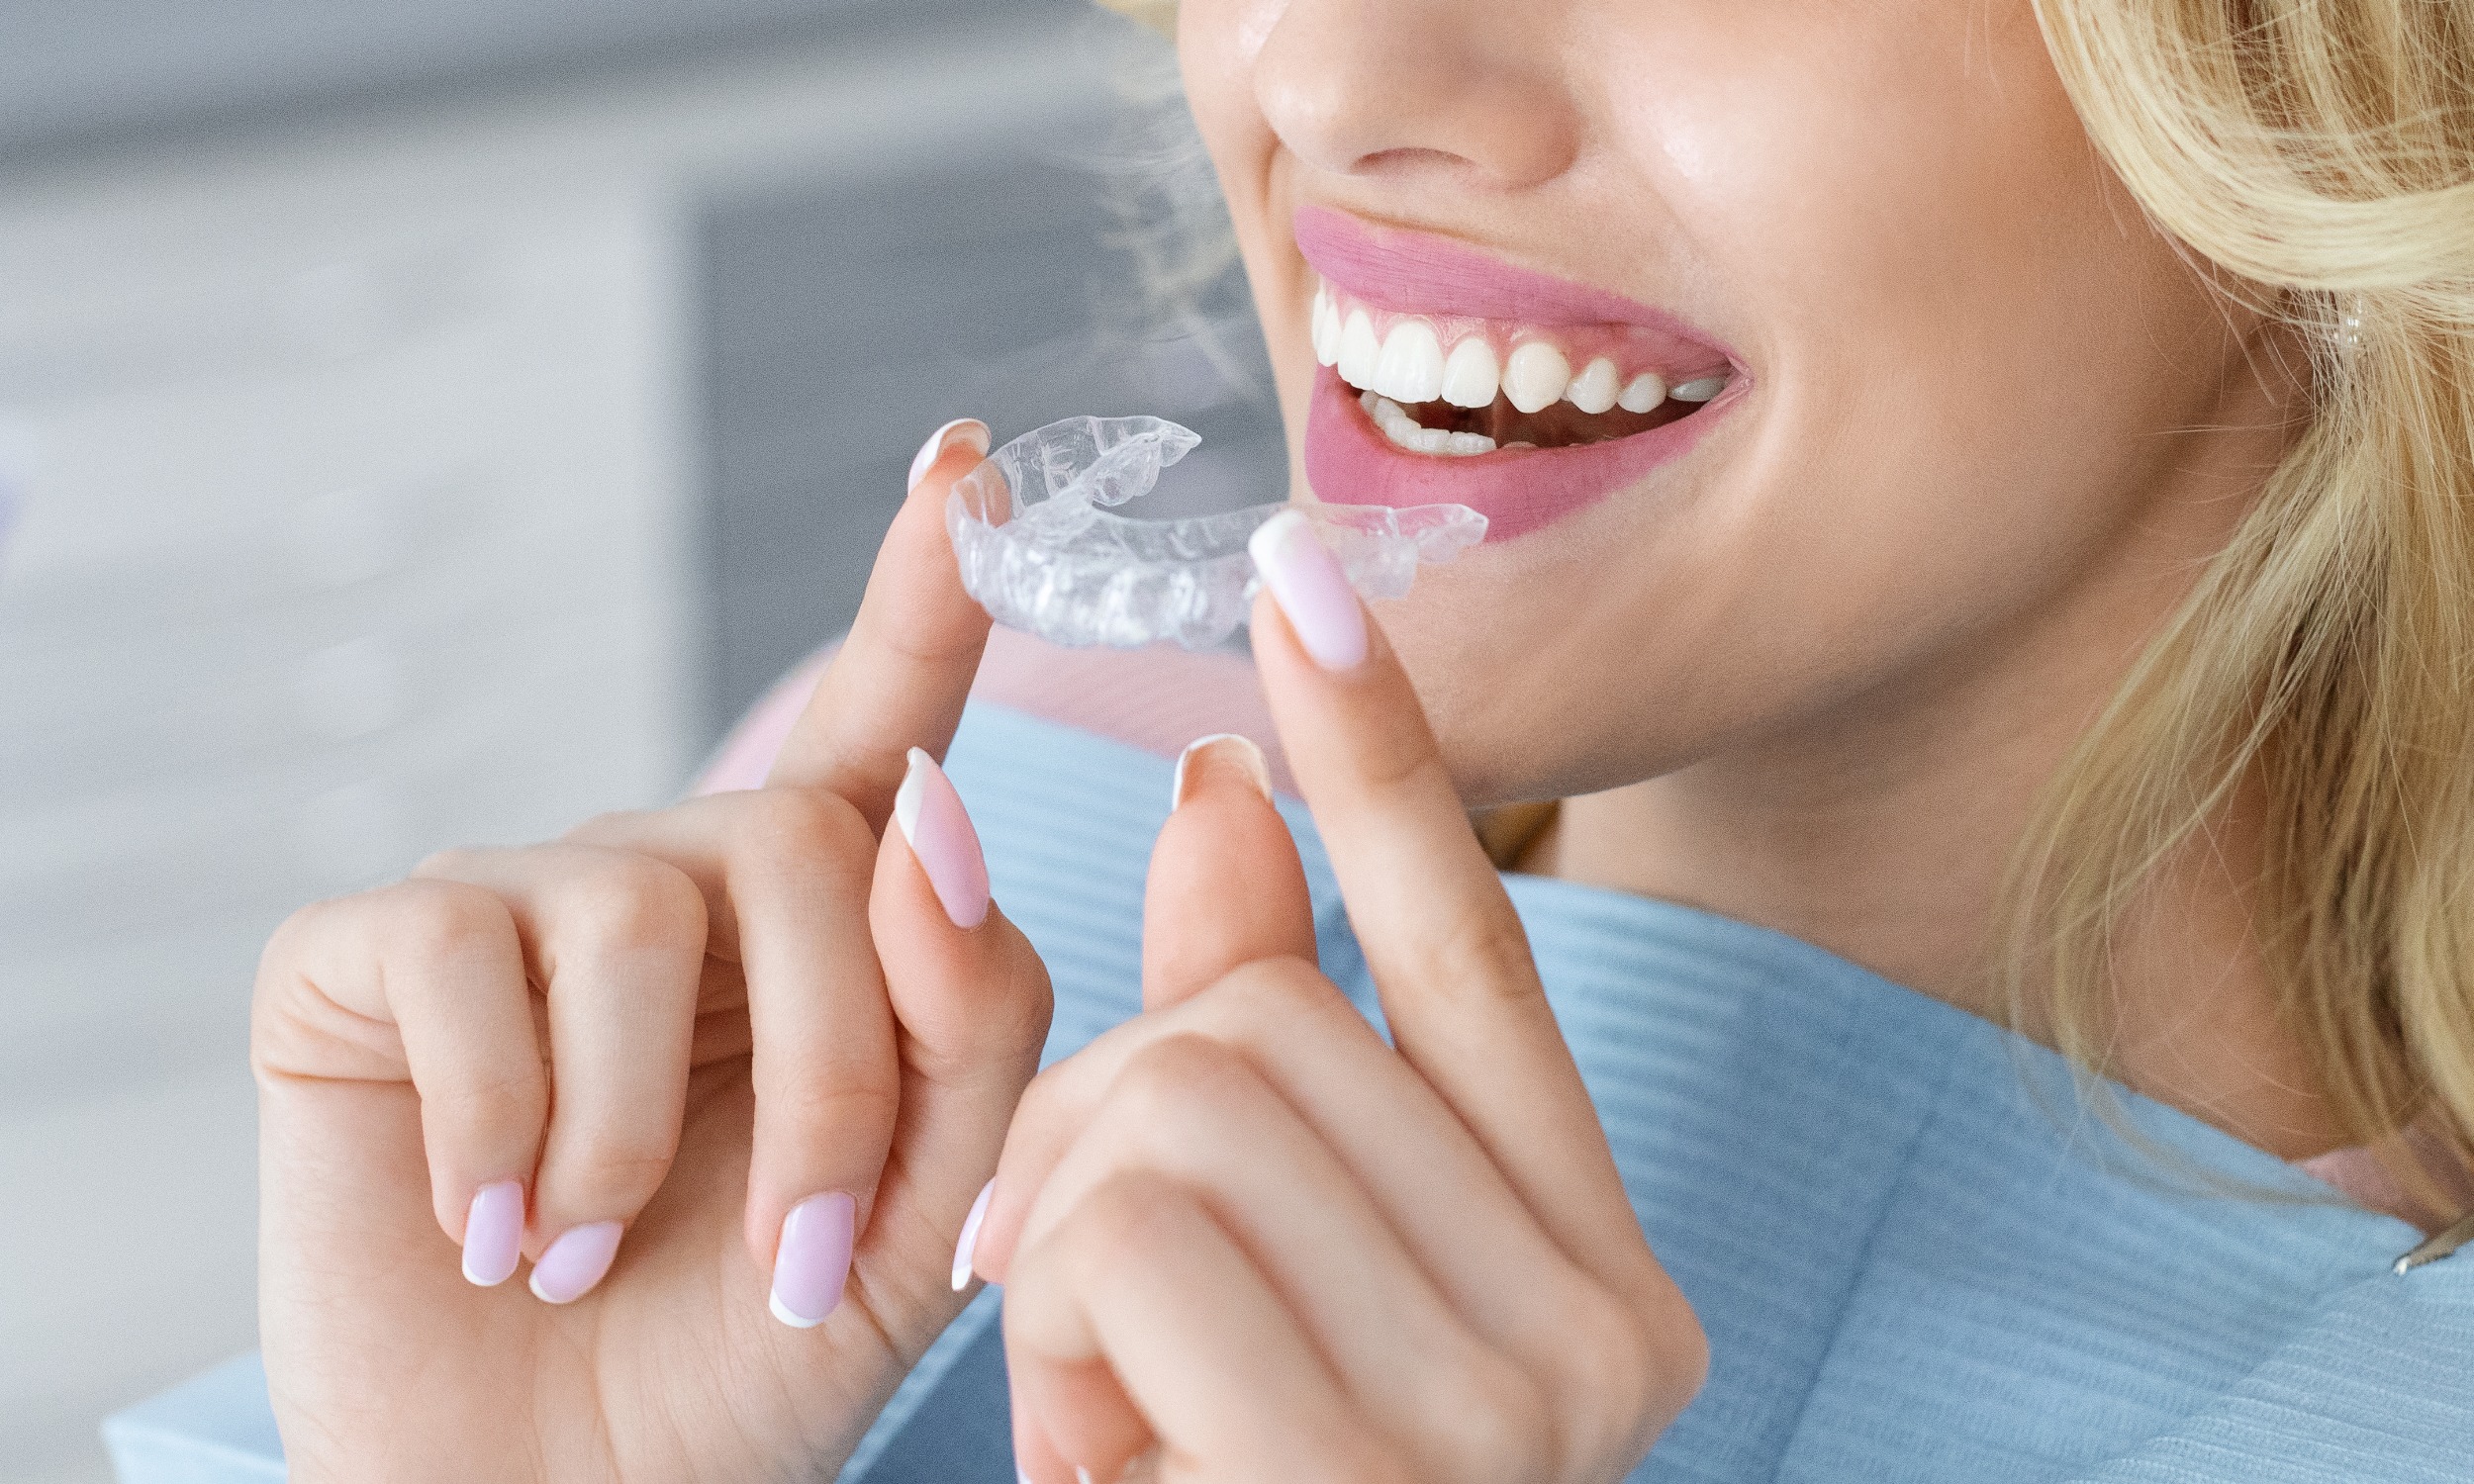 How To Choose The Best Retainer For You